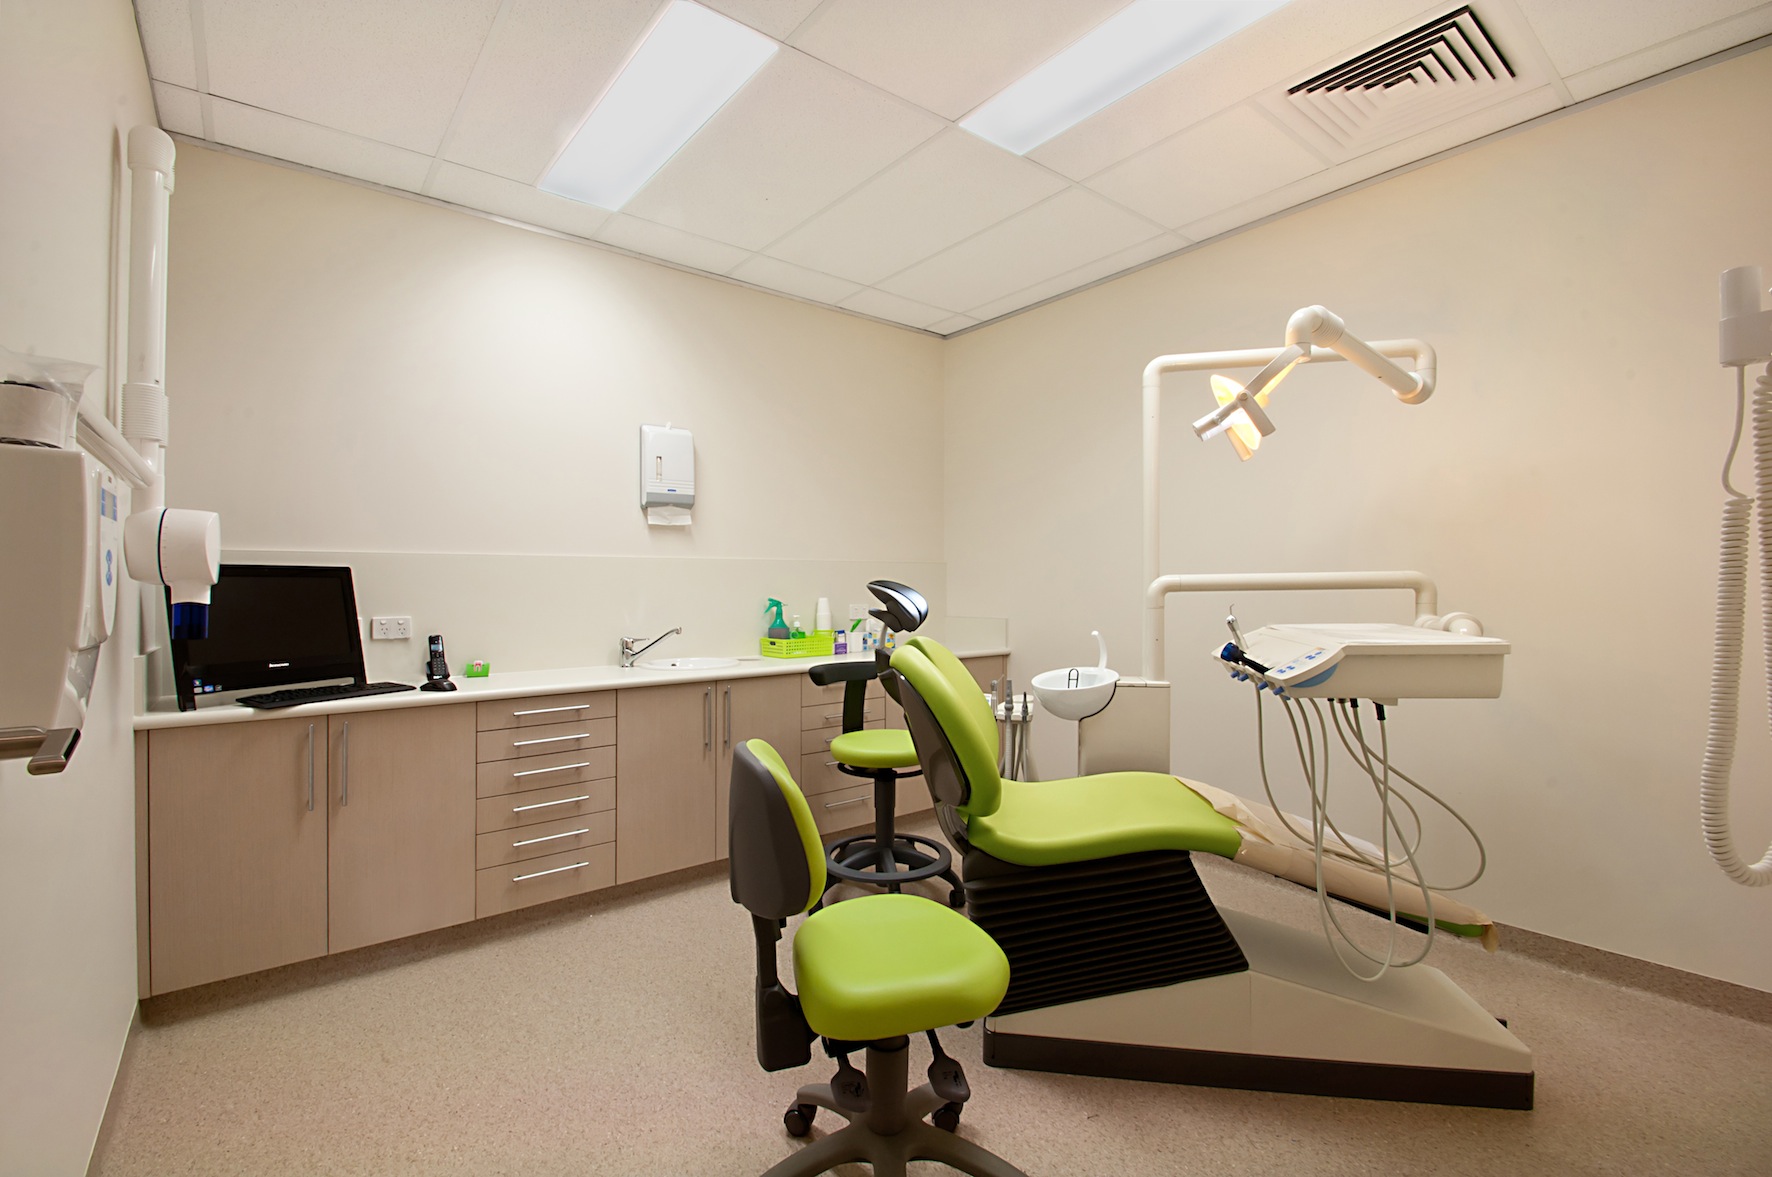 Secrets For A Great Dental Clinic Design | My Decorative